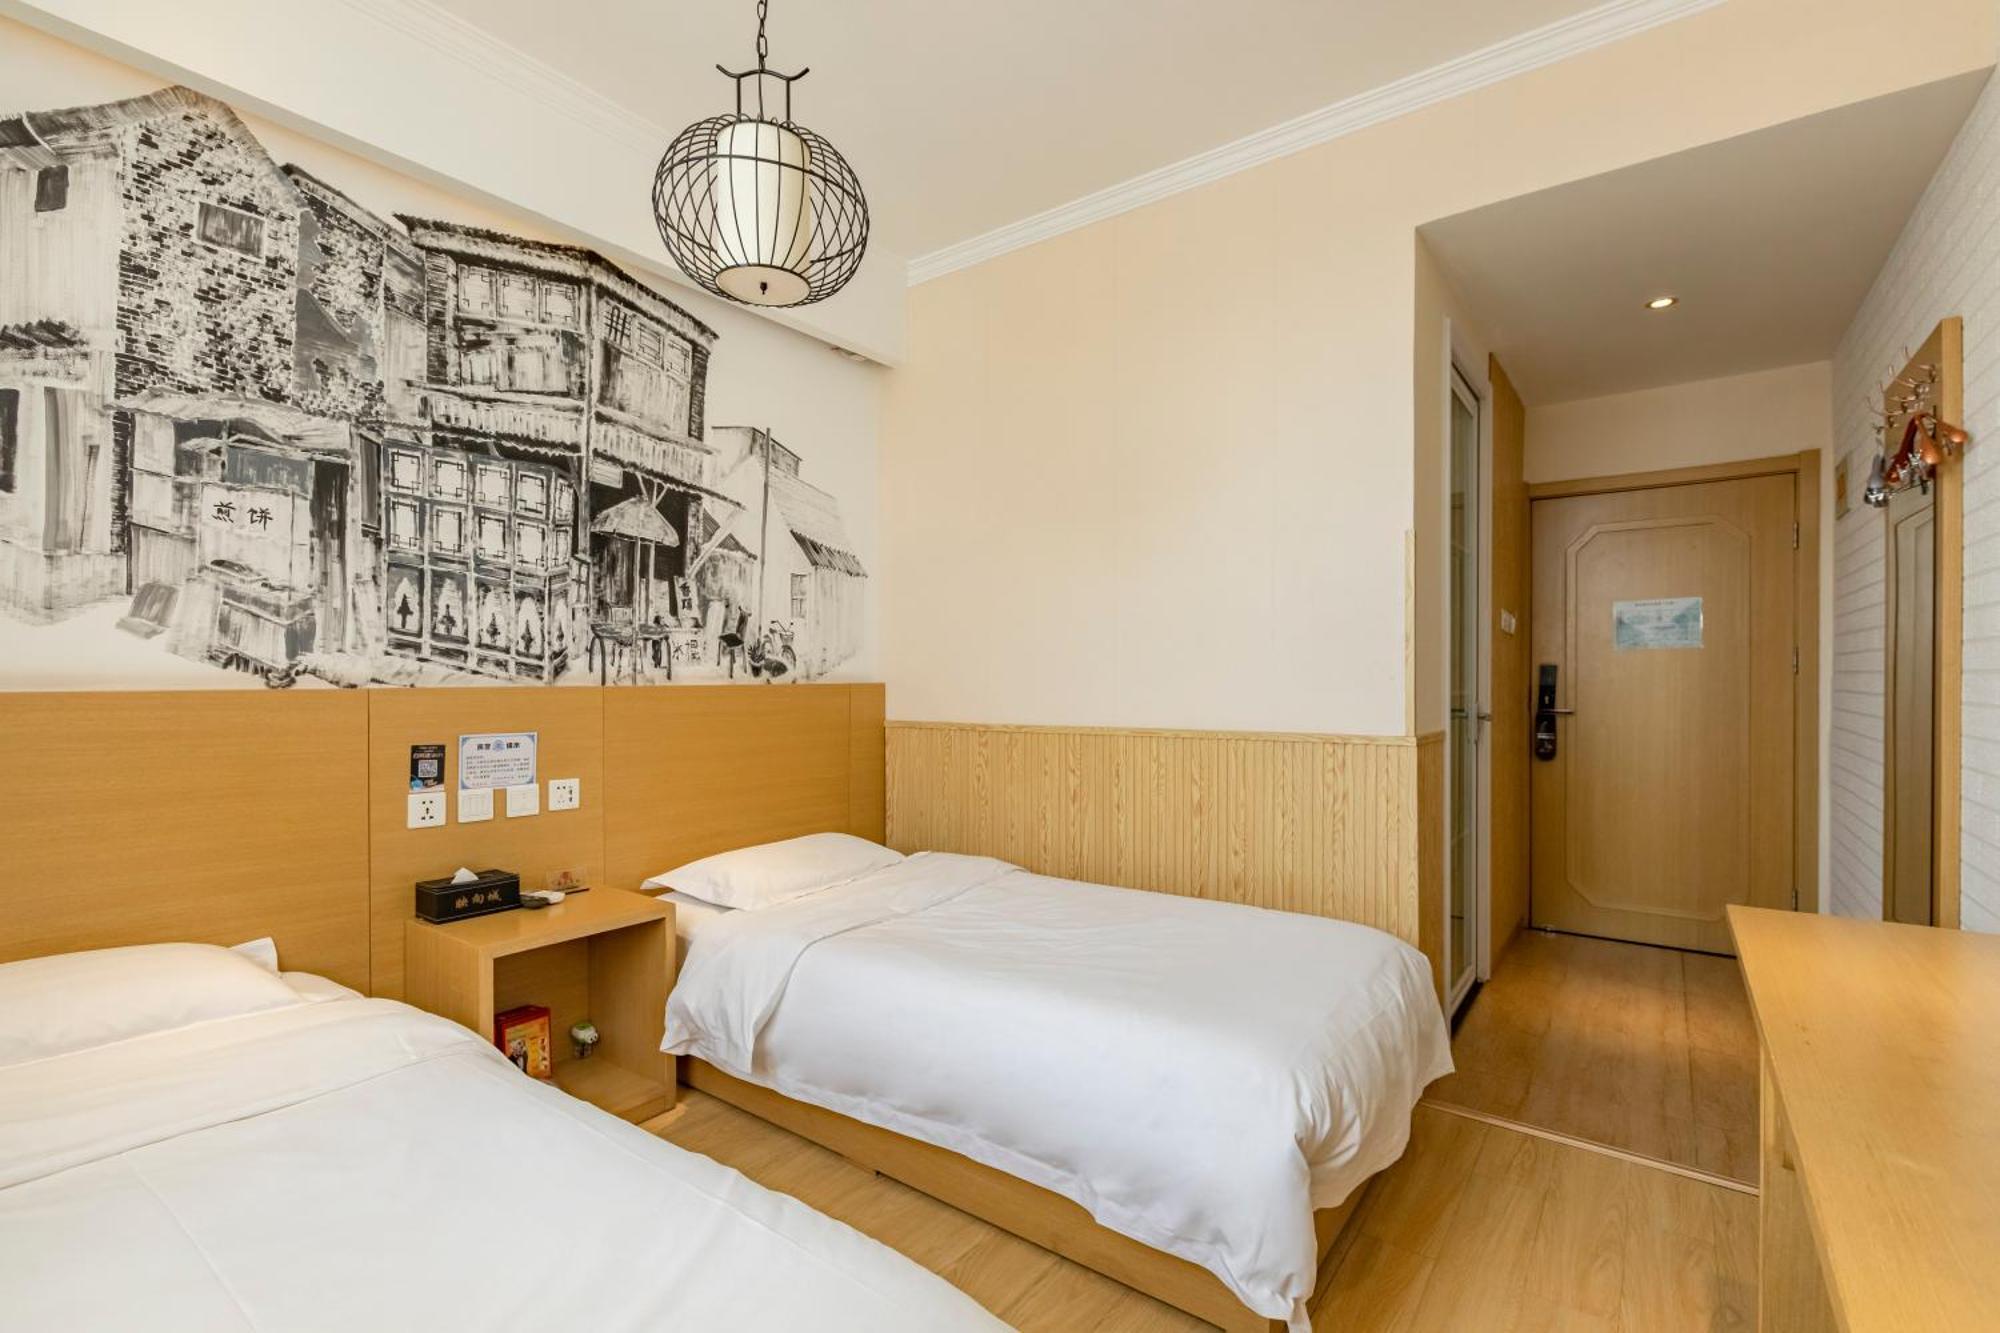 Happy Dragon Alley Hotel-In The City Center With Big Window&Free Coffe, Fluent English Speaking,Tourist Attractions Ticket Service&Food Recommendation,Near Tian Anmen Forbiddencity,Near Lama Temple,Easy To Walk To Nanluoalley&Shichahai Peking Exterior foto